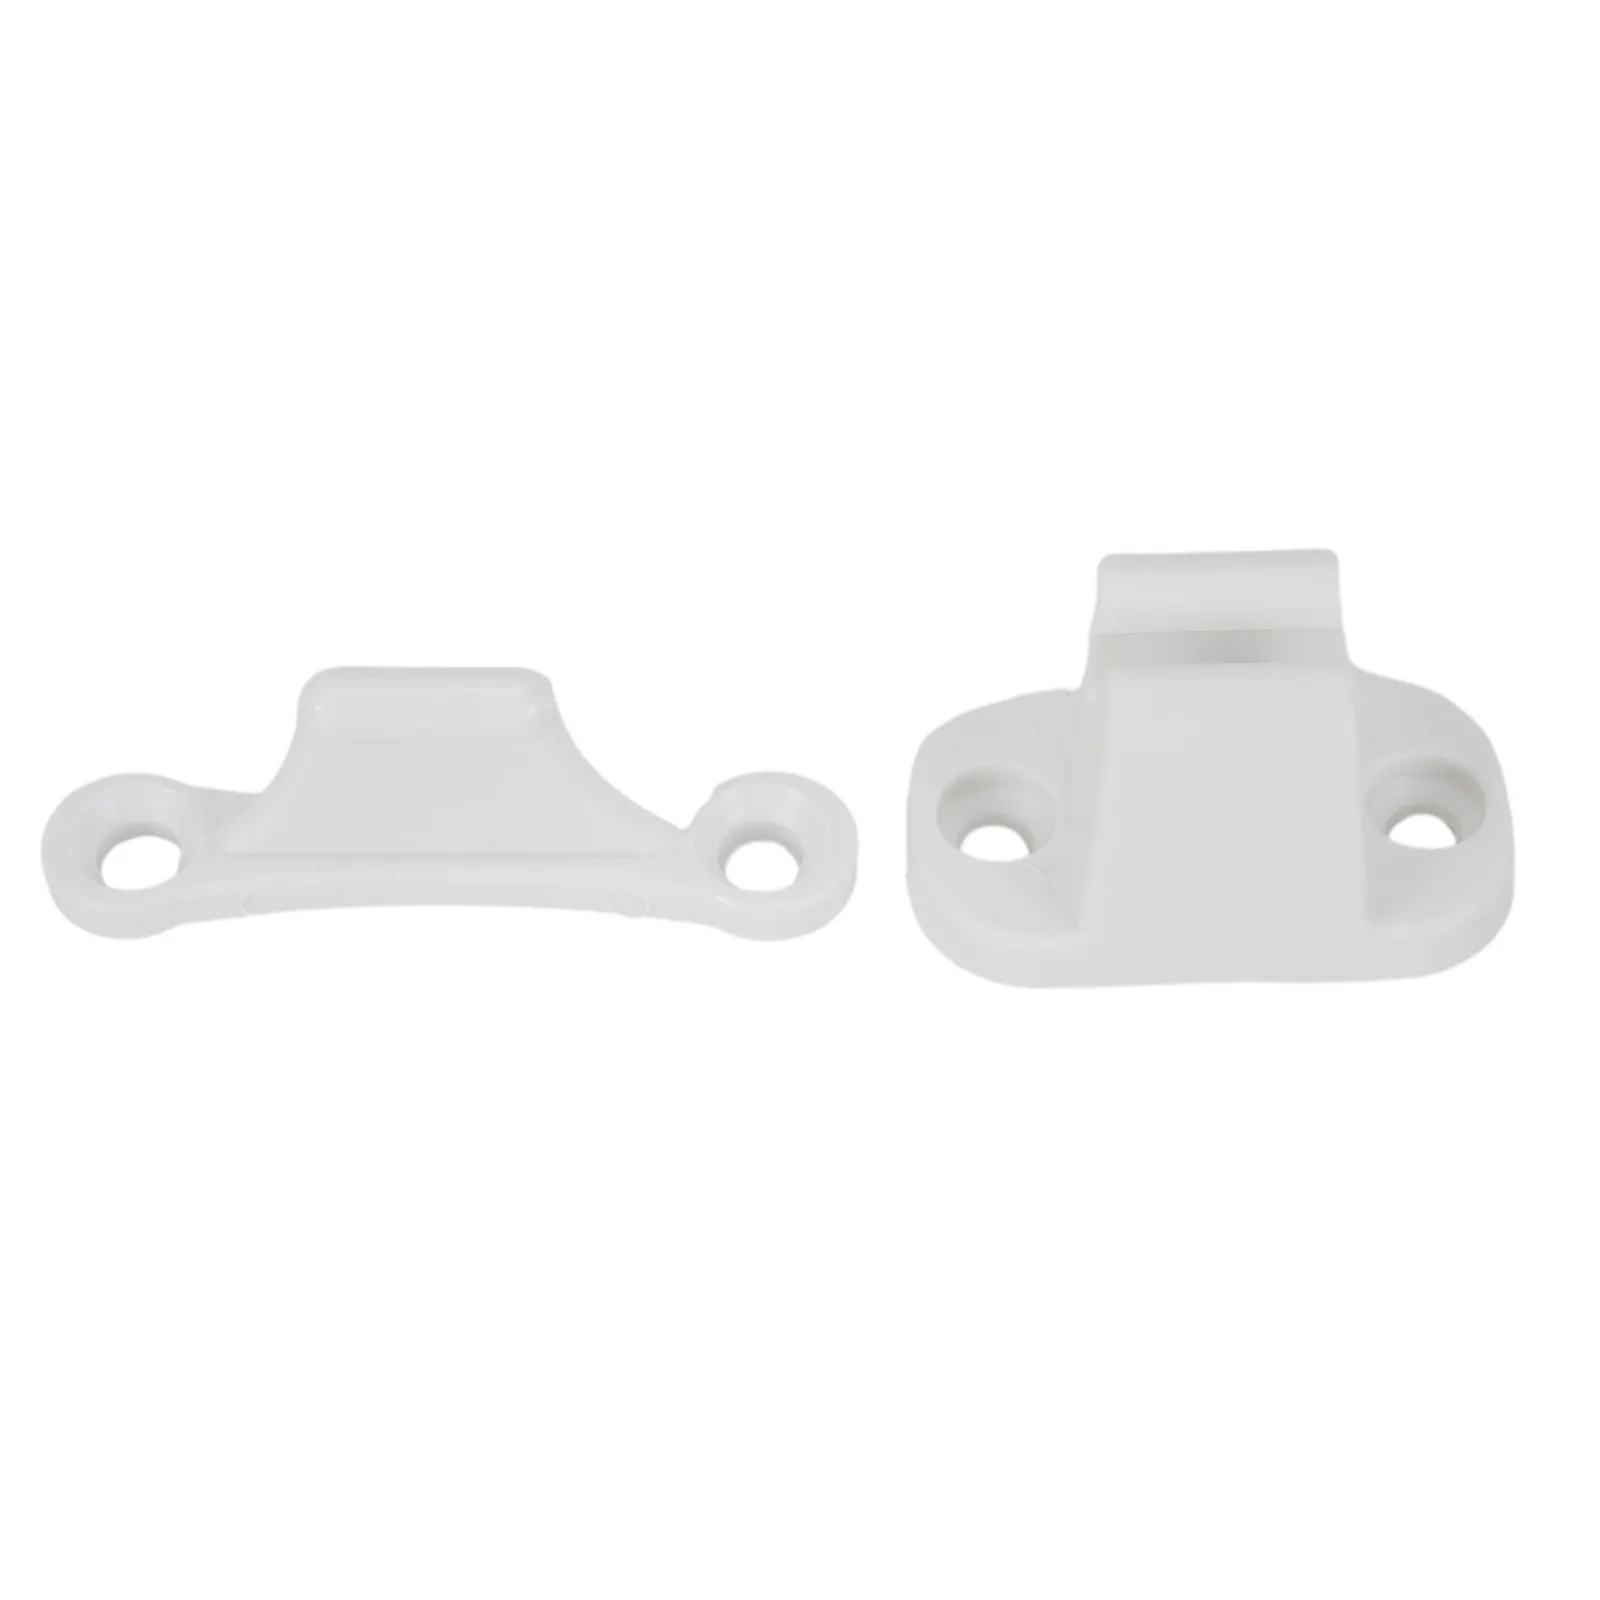 1* Catch Door Retainer Catch For Swift Main Door Catch Retainer Motorhome White For Compass For Elddis Durable retainer replace for hitachi pr 38e 971078